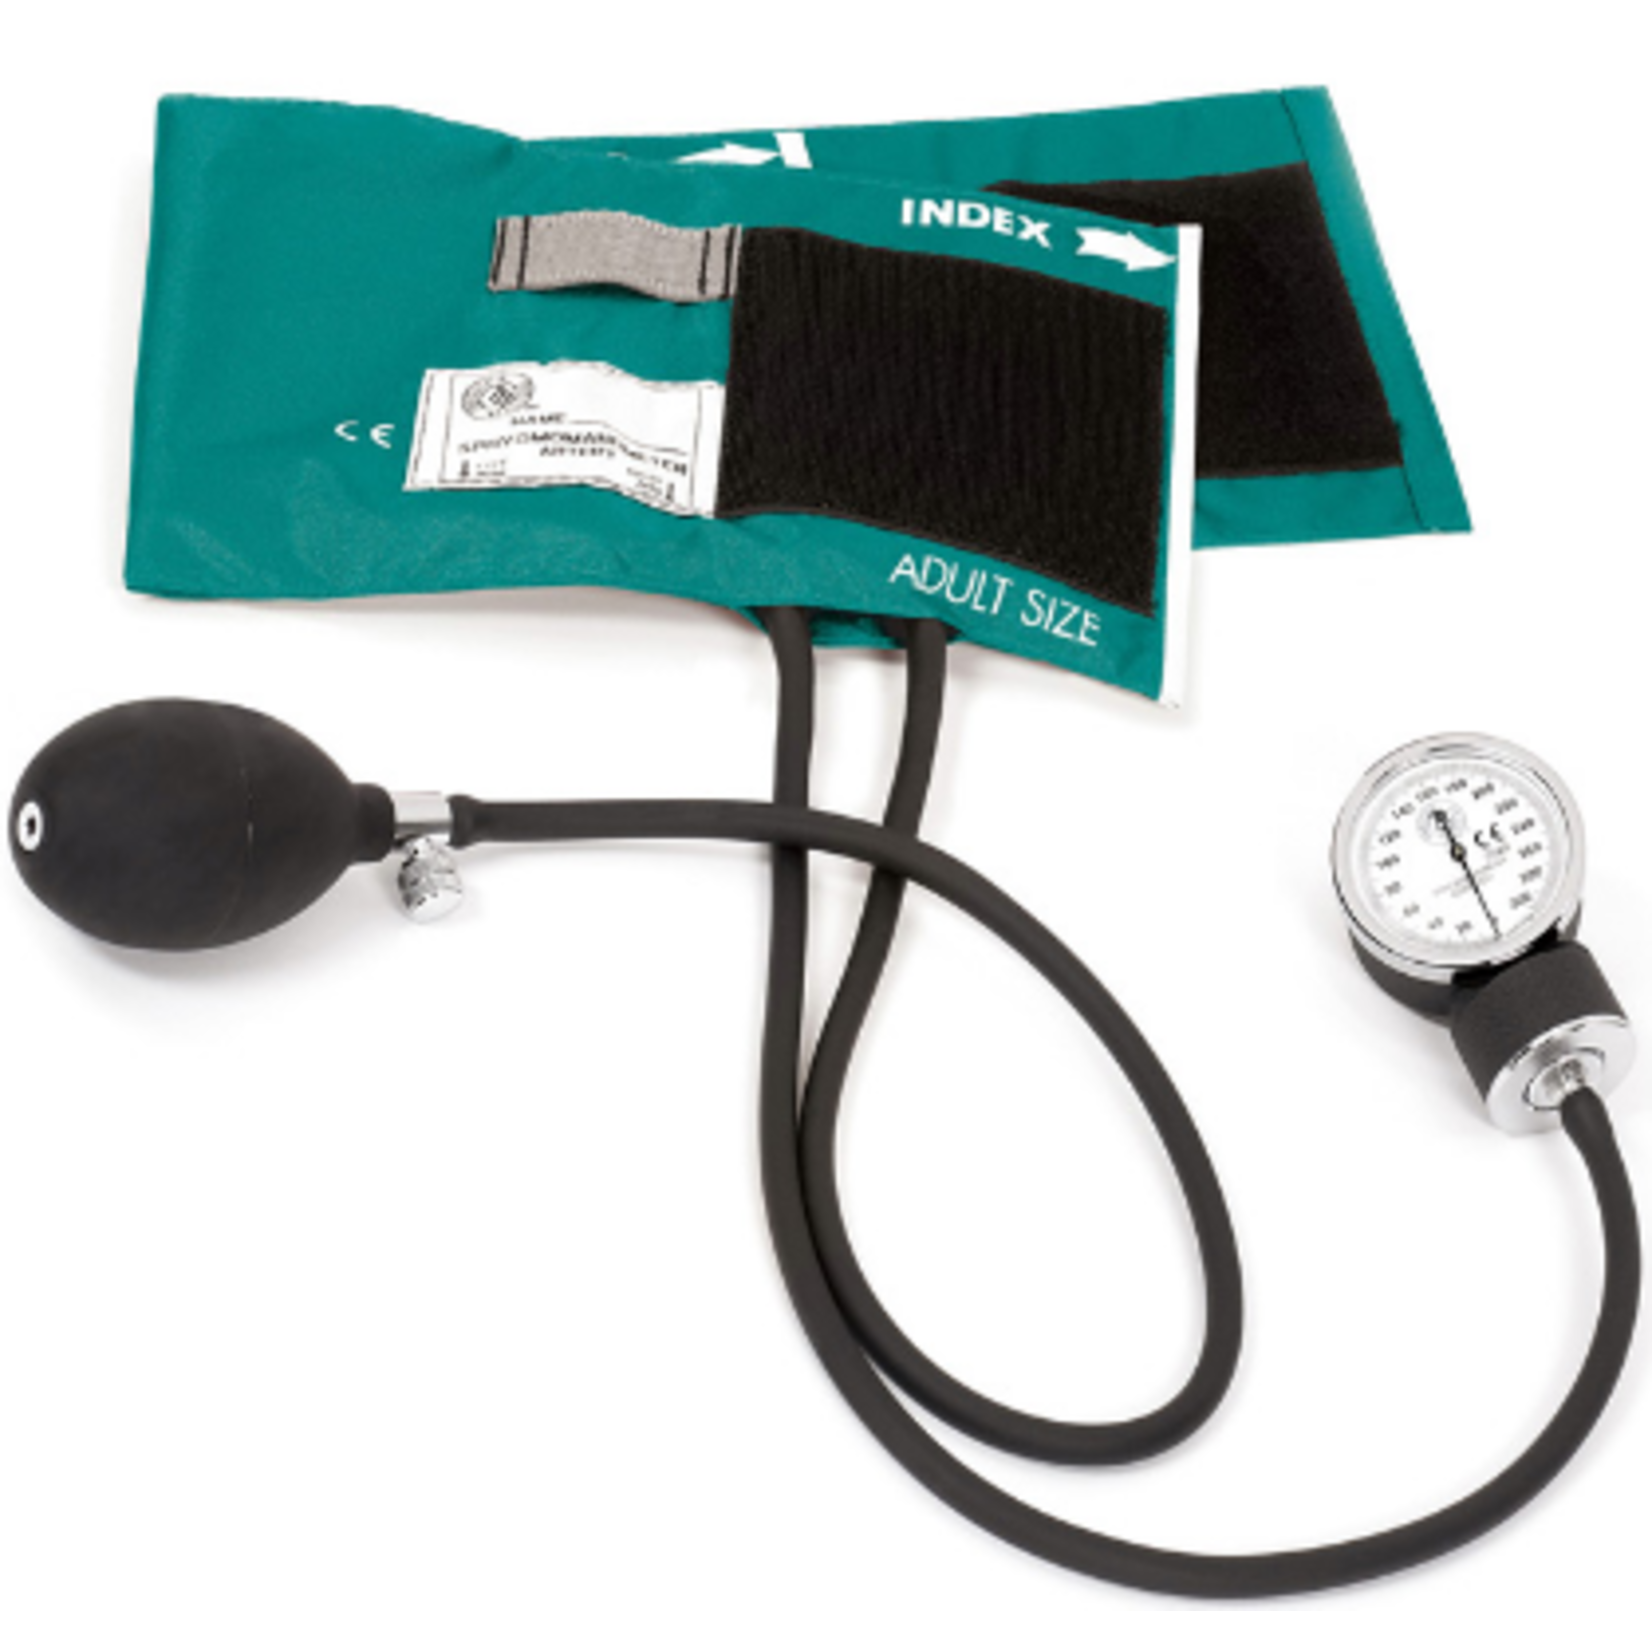 Prestige Medical Aneroid Sphymomanometer with Carrying Case